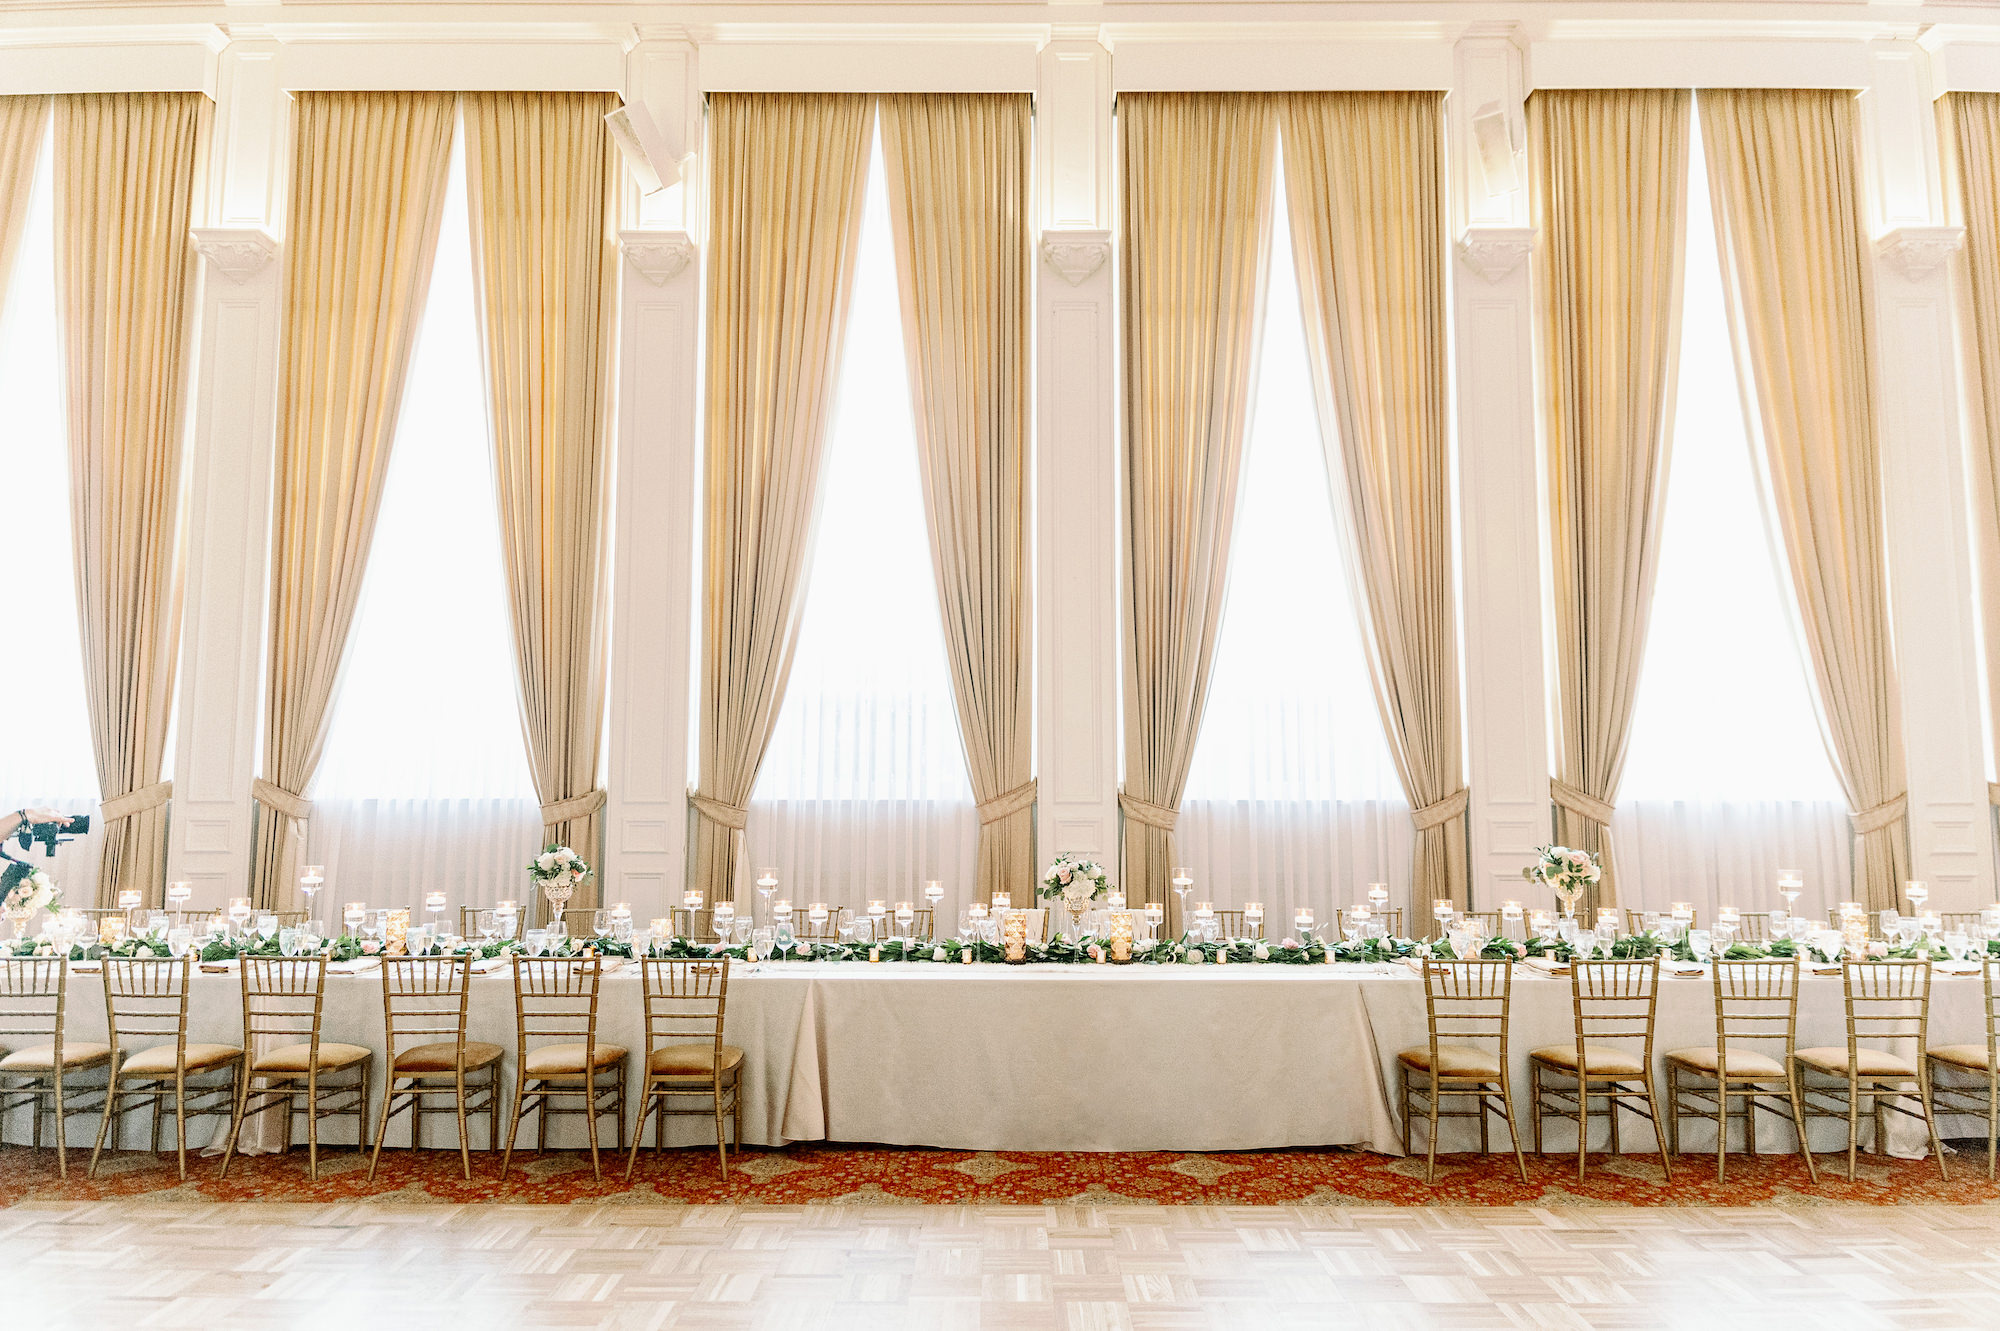 Timeless Gold Elegant Long Head Feasting Table Wedding Reception Ideas | South Tampa Wedding Florist Monarch Events and Design | Venue Palma Ceia Country Club | Kate Ryan Event Rentals | Over The Top Rental Linens